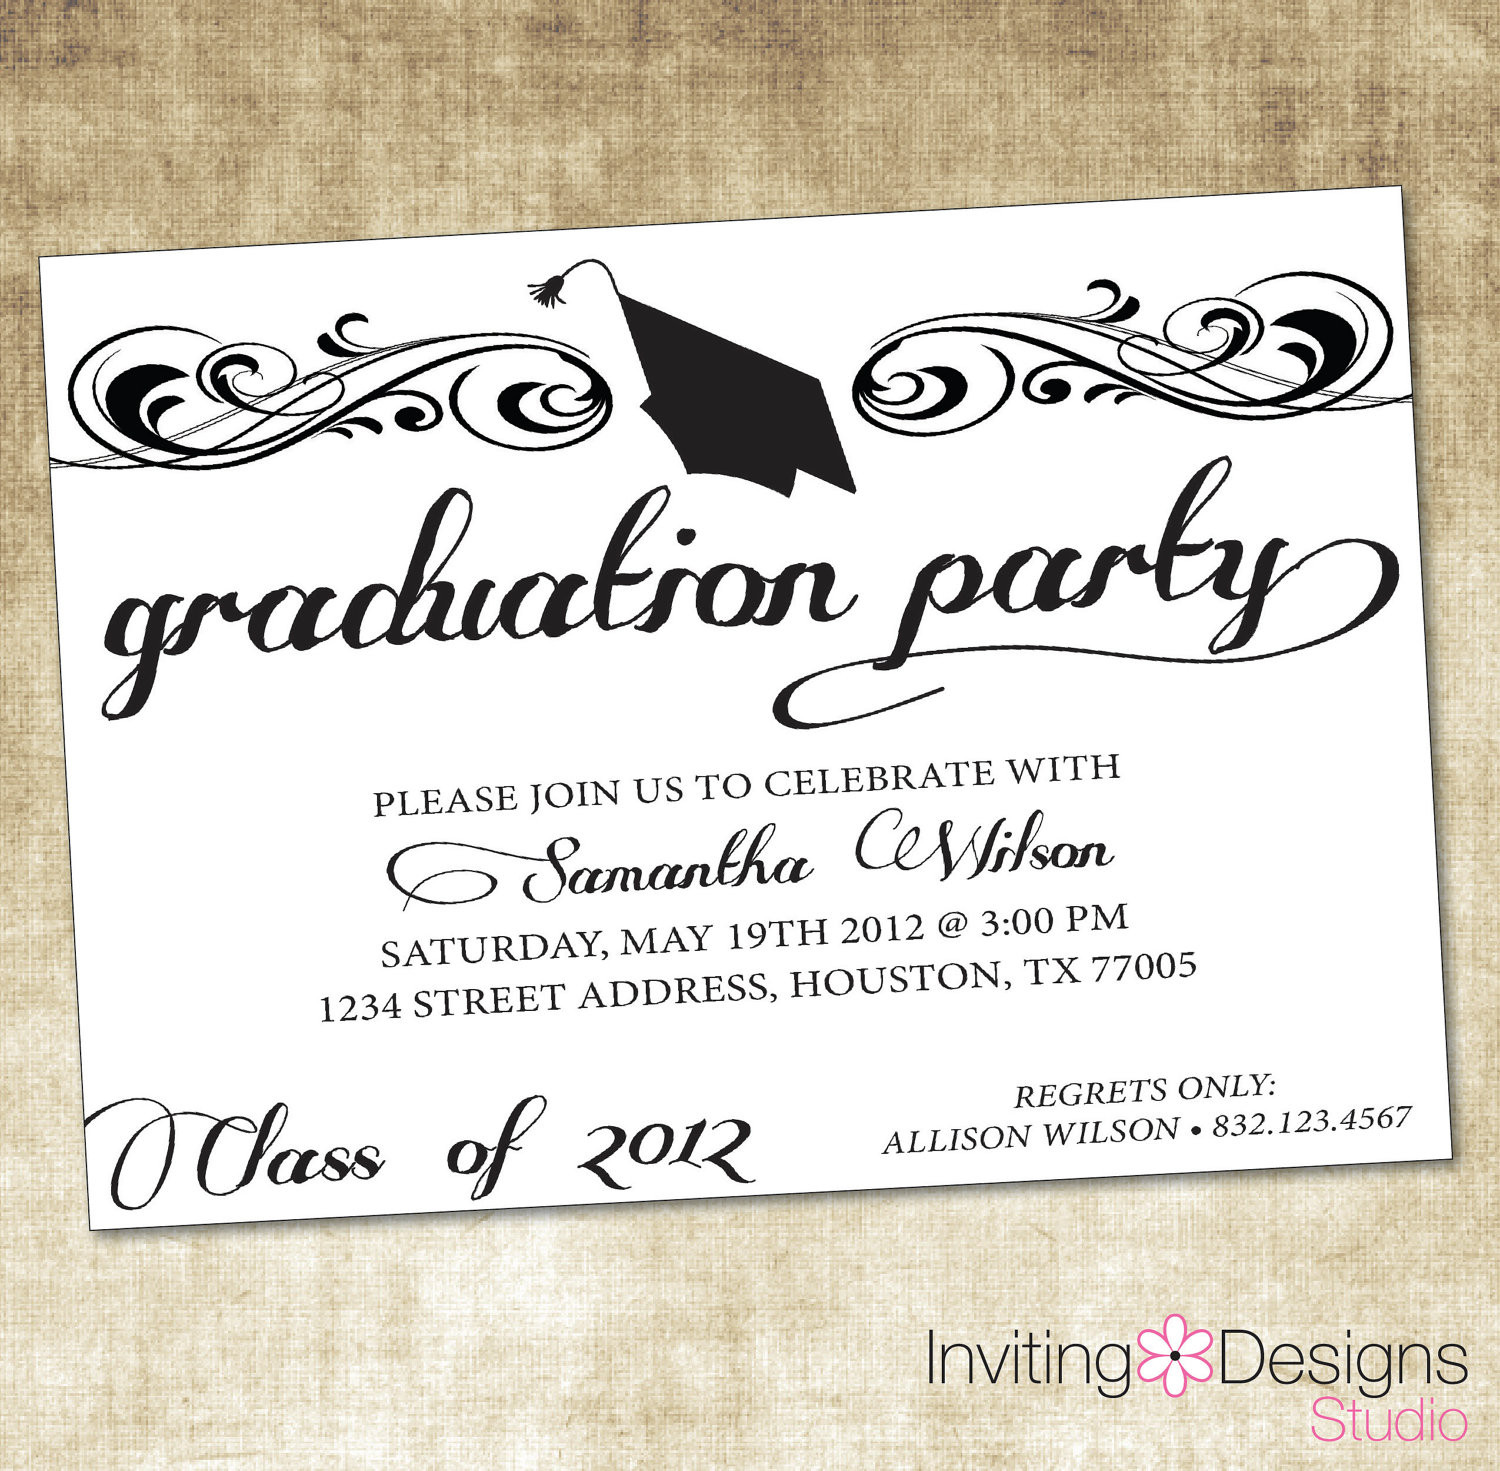 Graduation Party Invitations Ideas
 Quotes For Graduation Party Invitations QuotesGram